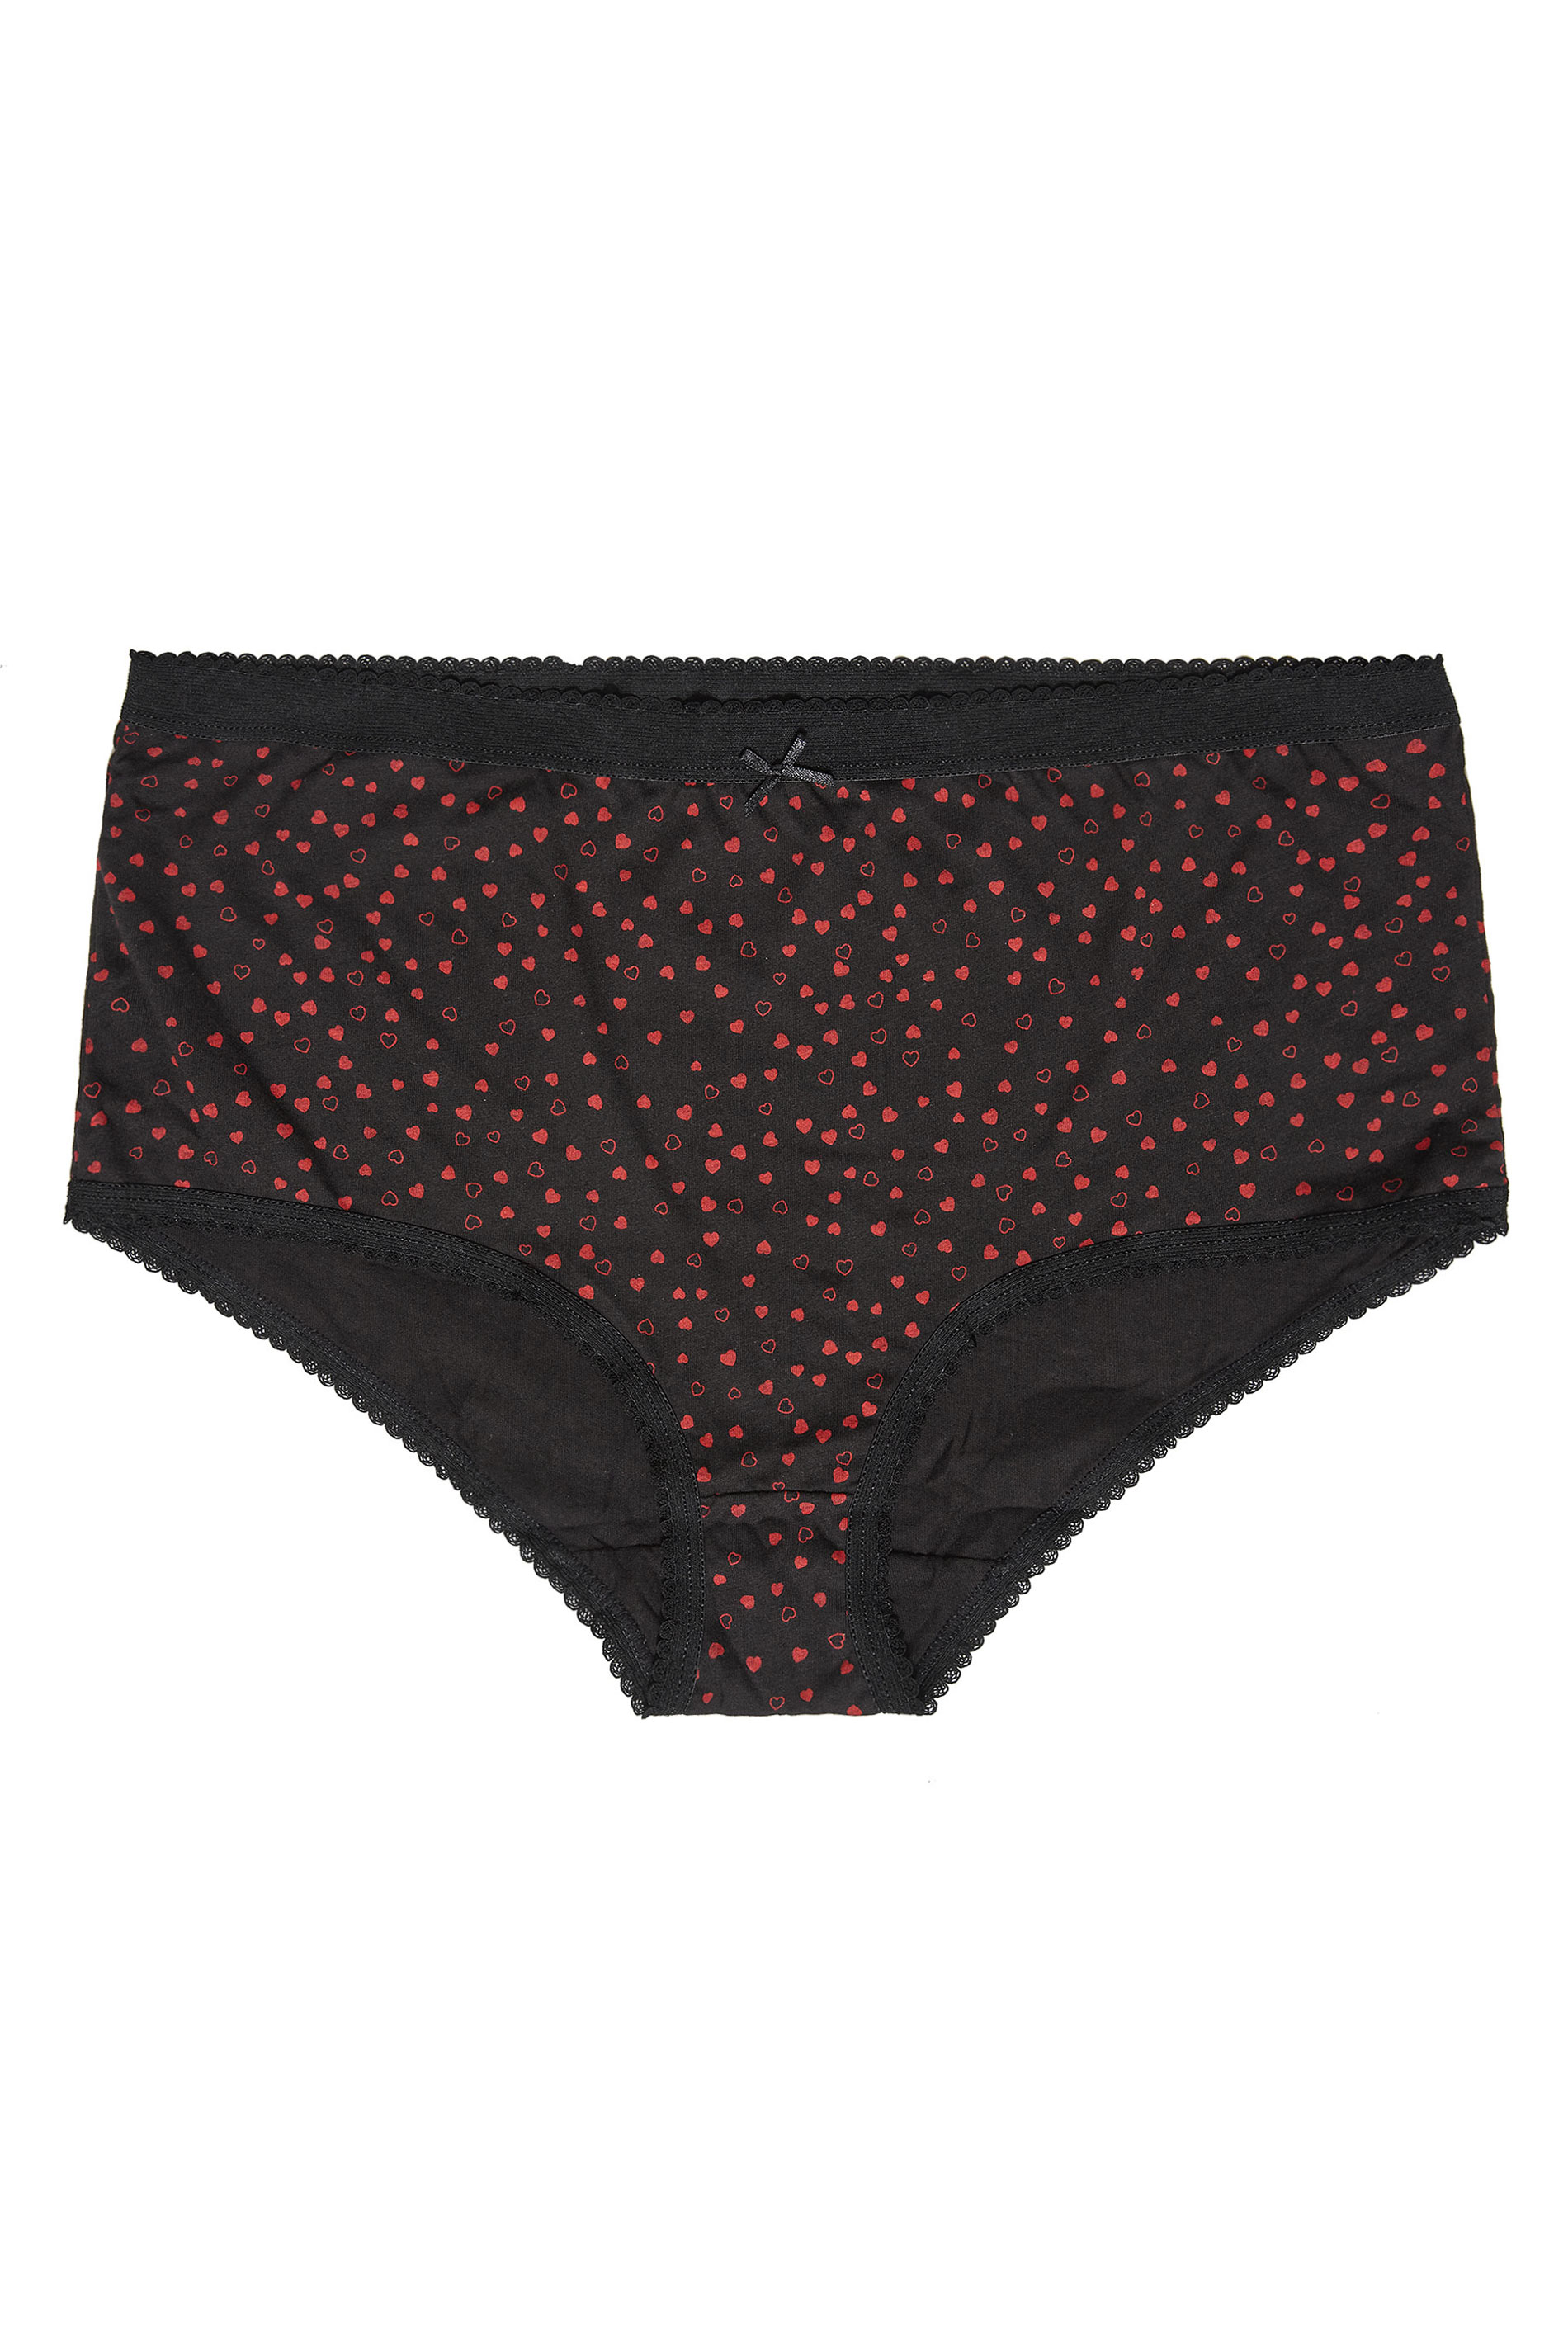 5 PACK Red & Black Heart Print Full Briefs | Yours Clothing